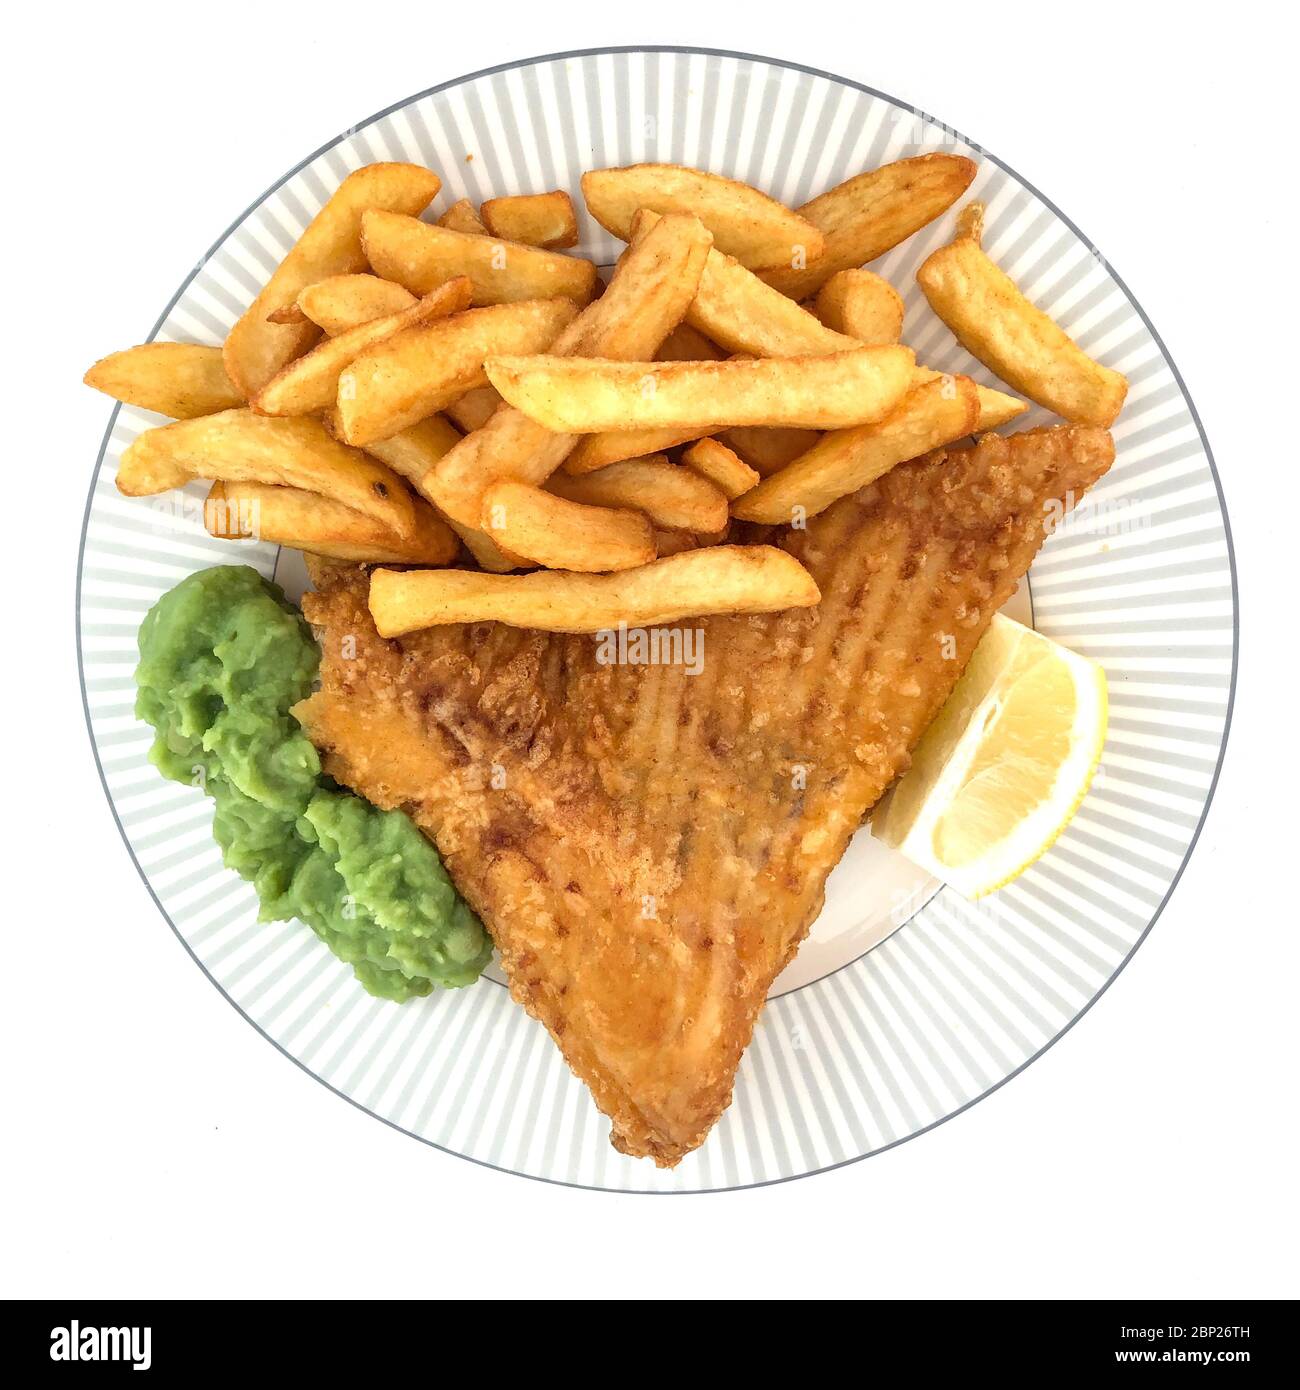 British fish and chips, in this case the fish is fried skate, chips, mushy peas and a slice of lemon. Stock Photo